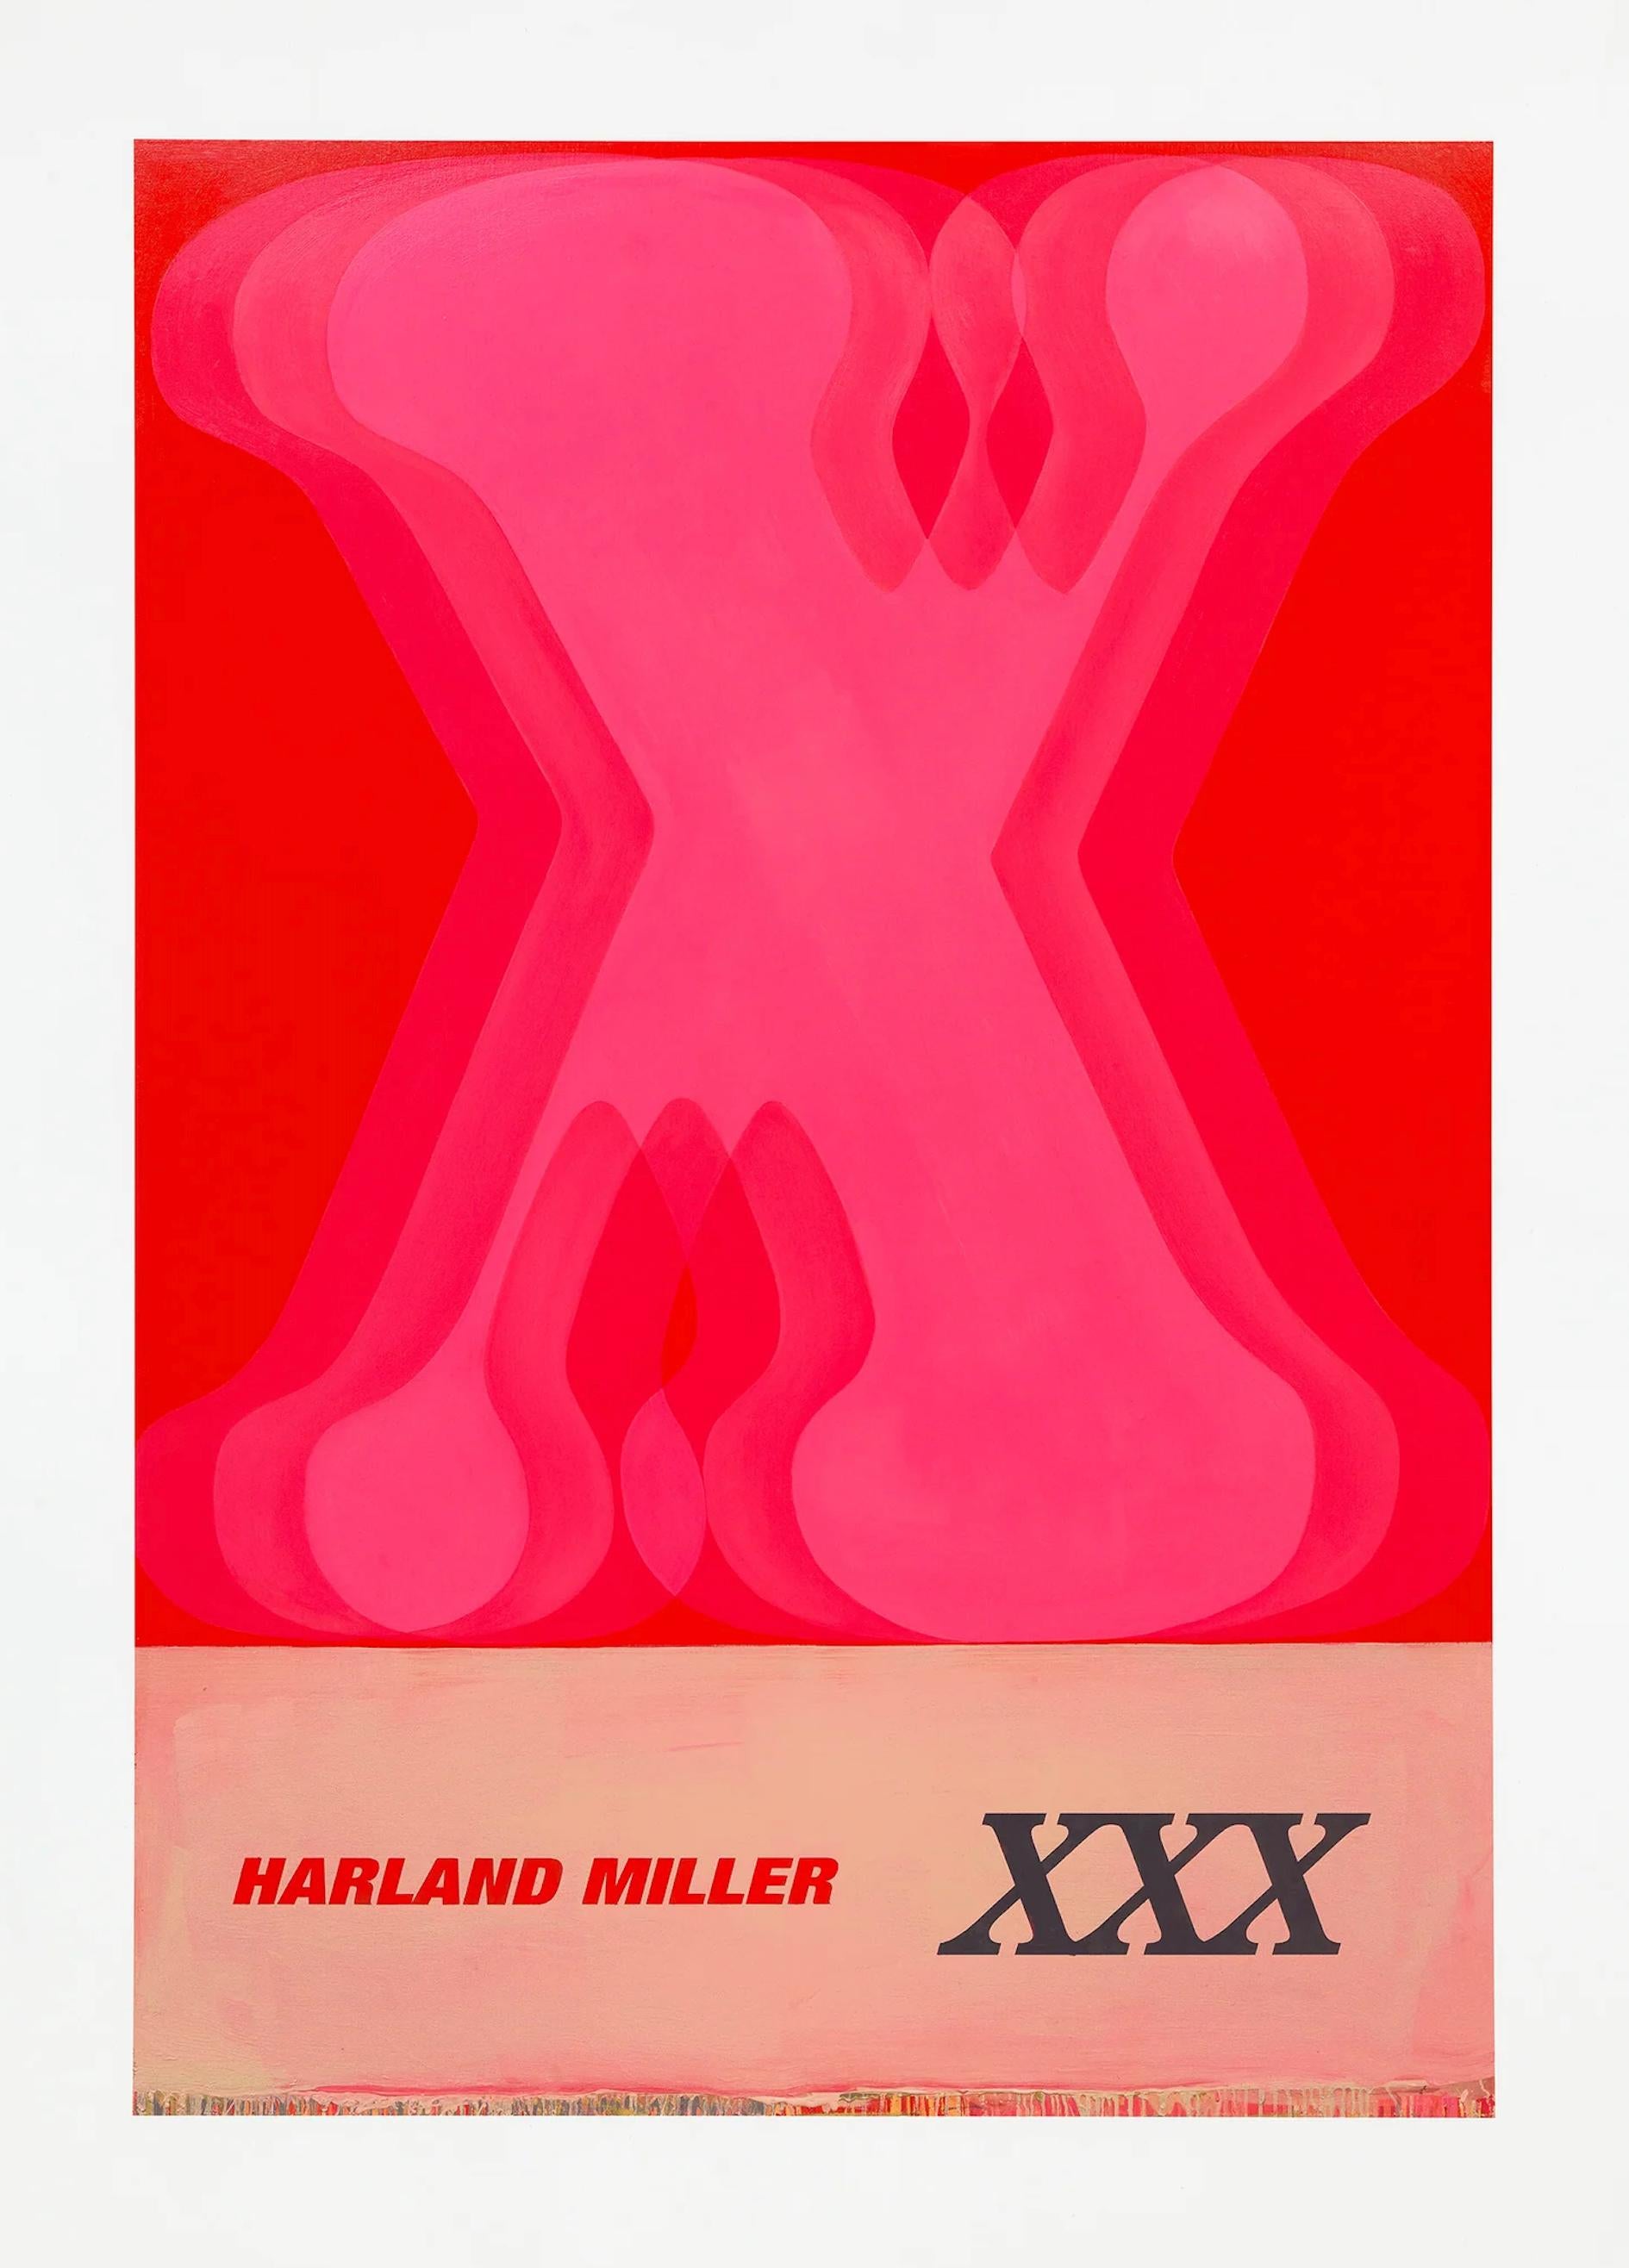 XXX - Print by Harland Miller